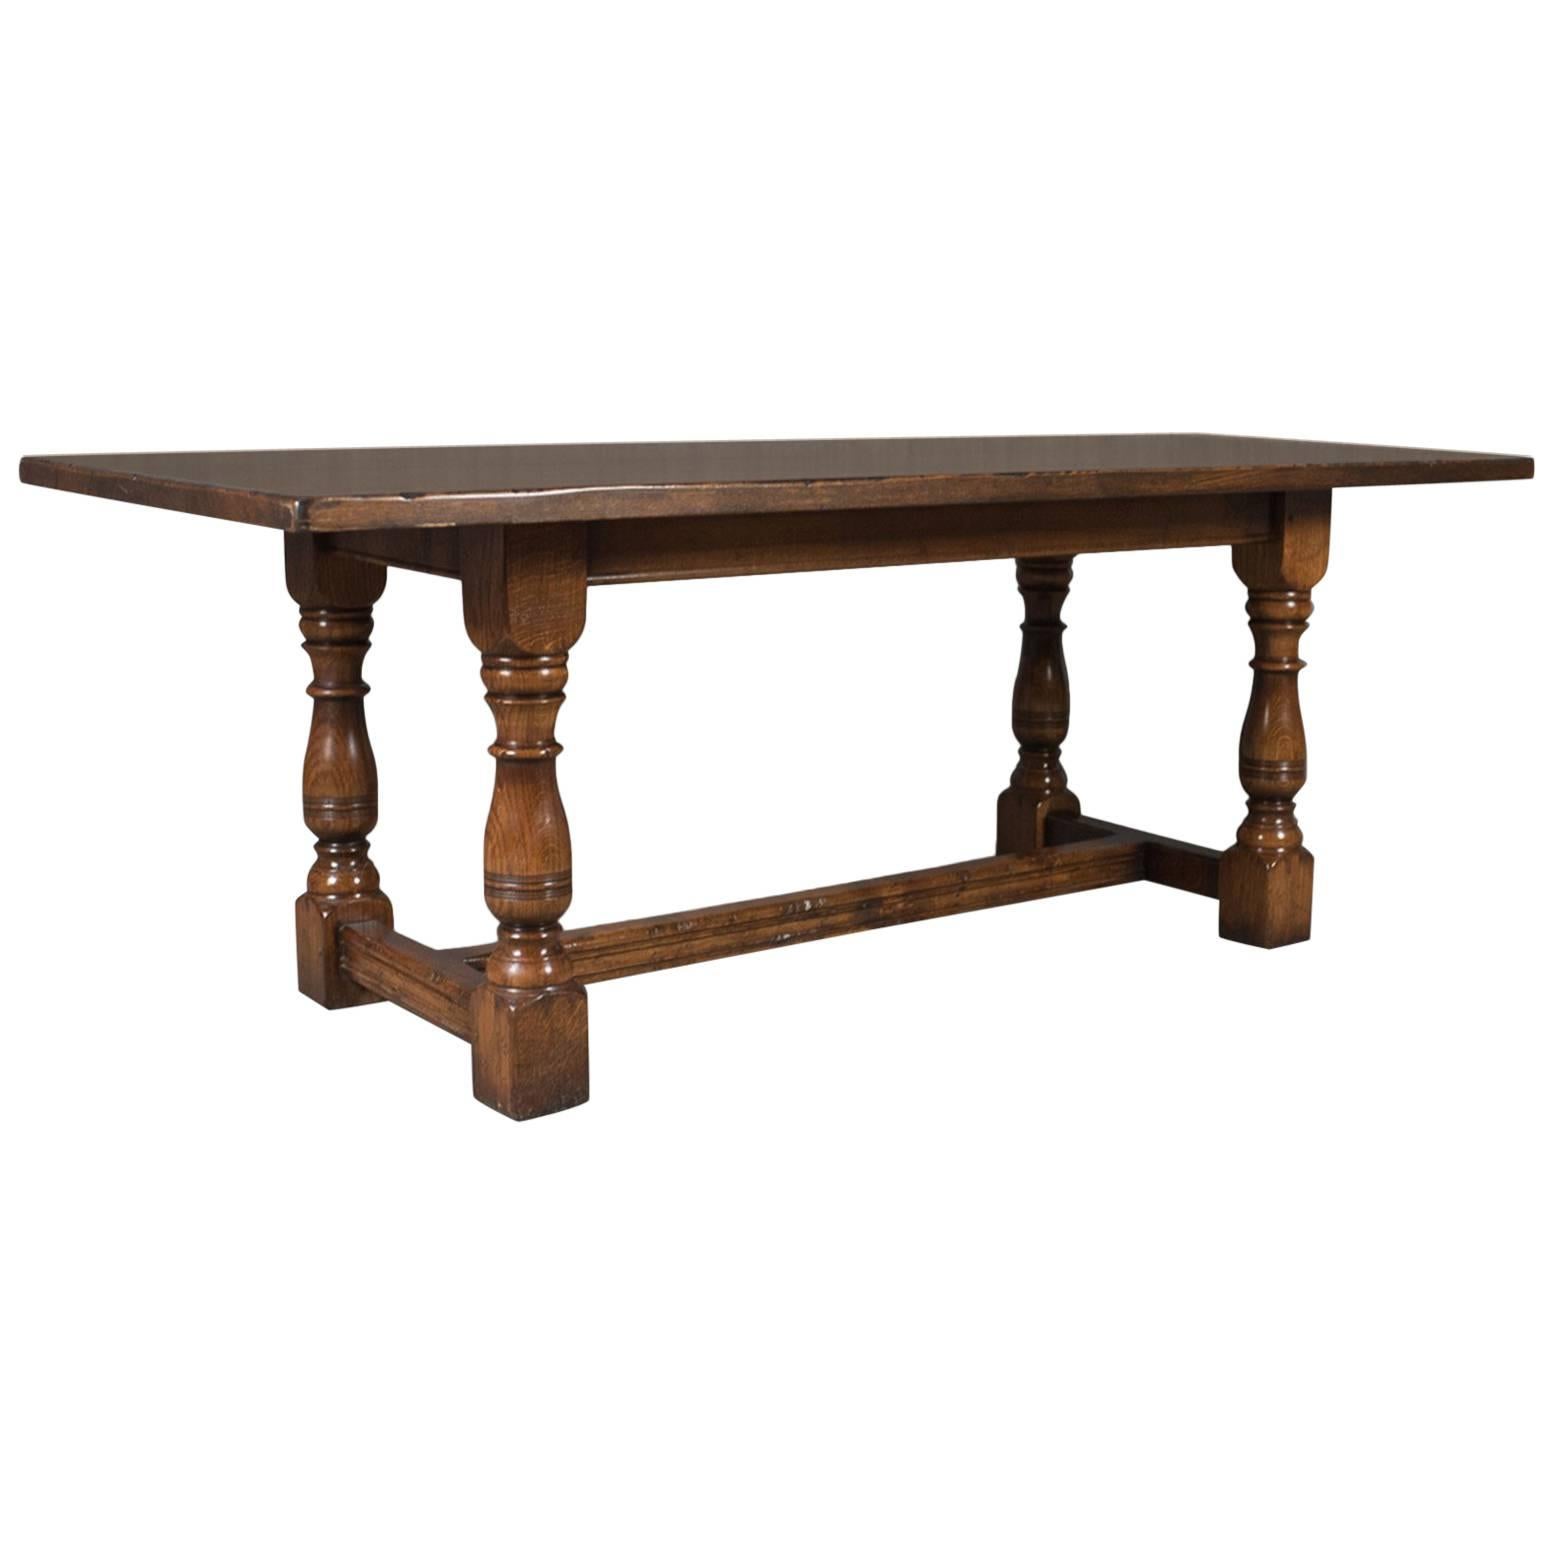 Six-Eight-Seat Oak Refectory Table, 17th Century Revival, Late 20th Century